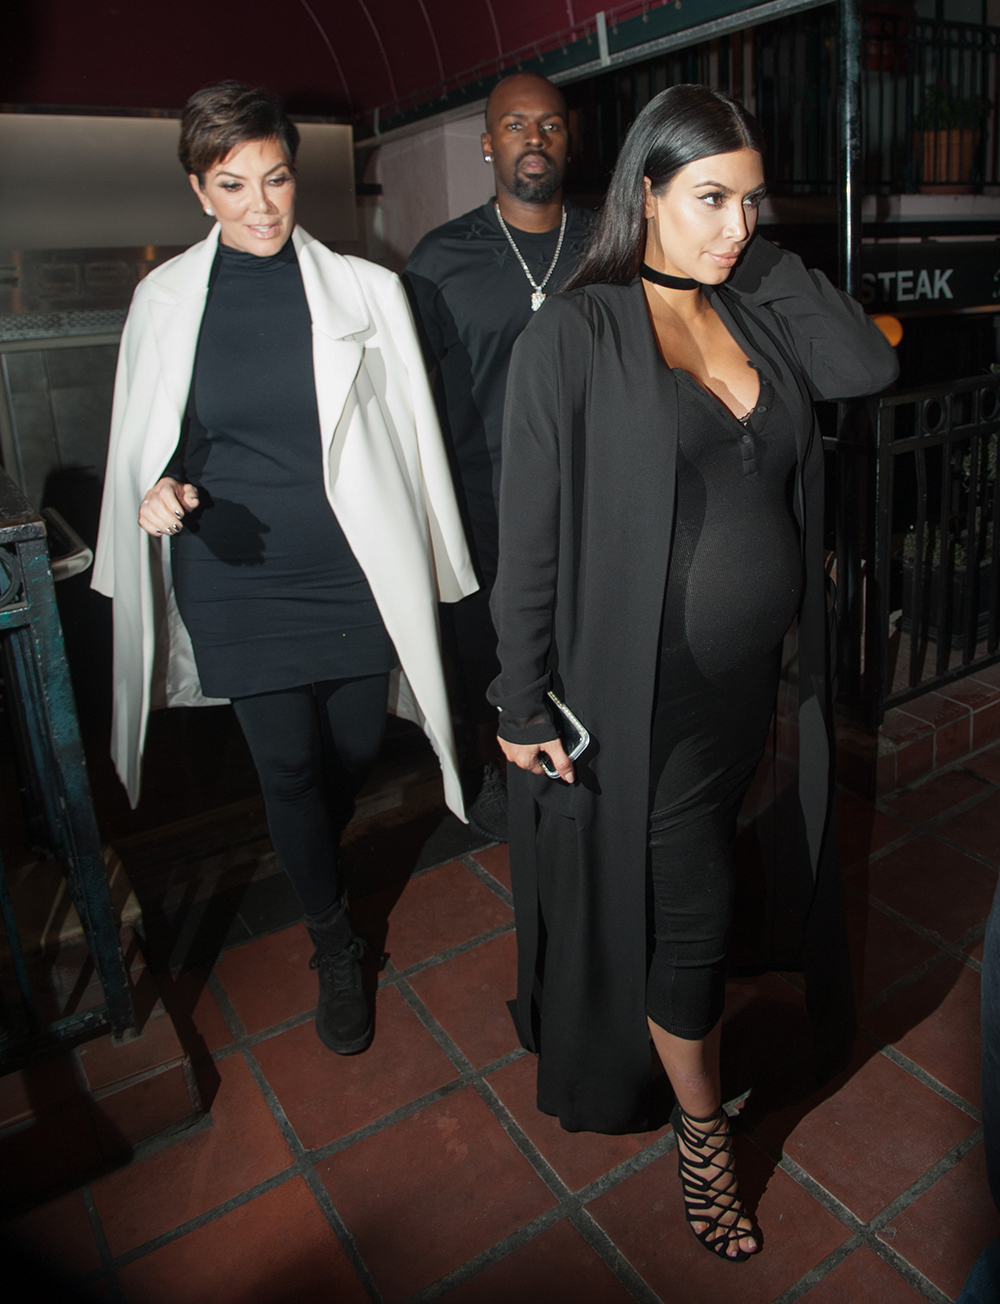 SEPTEMBER 22, 2015: Kim steps out with her mother Kris Jenner wearing a figure-hugging black dress, black duster coat, choker and caged sandals. Photo / Getty Images